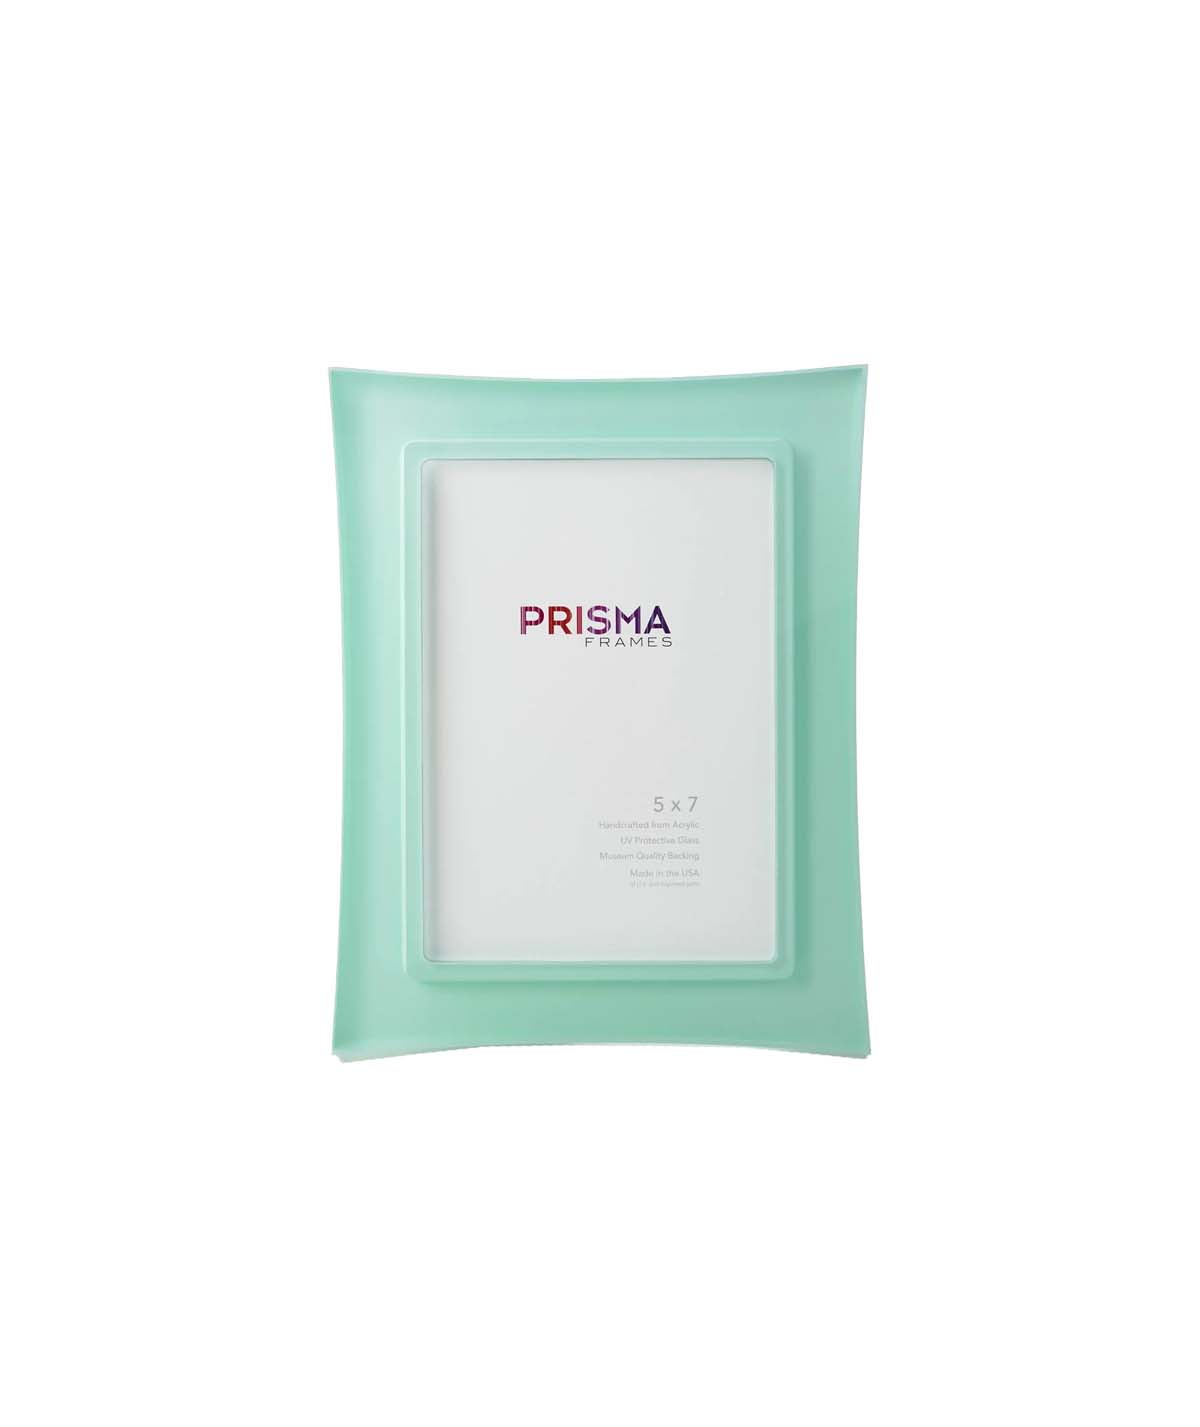 Risa Mint Green frame with flared edges, front view